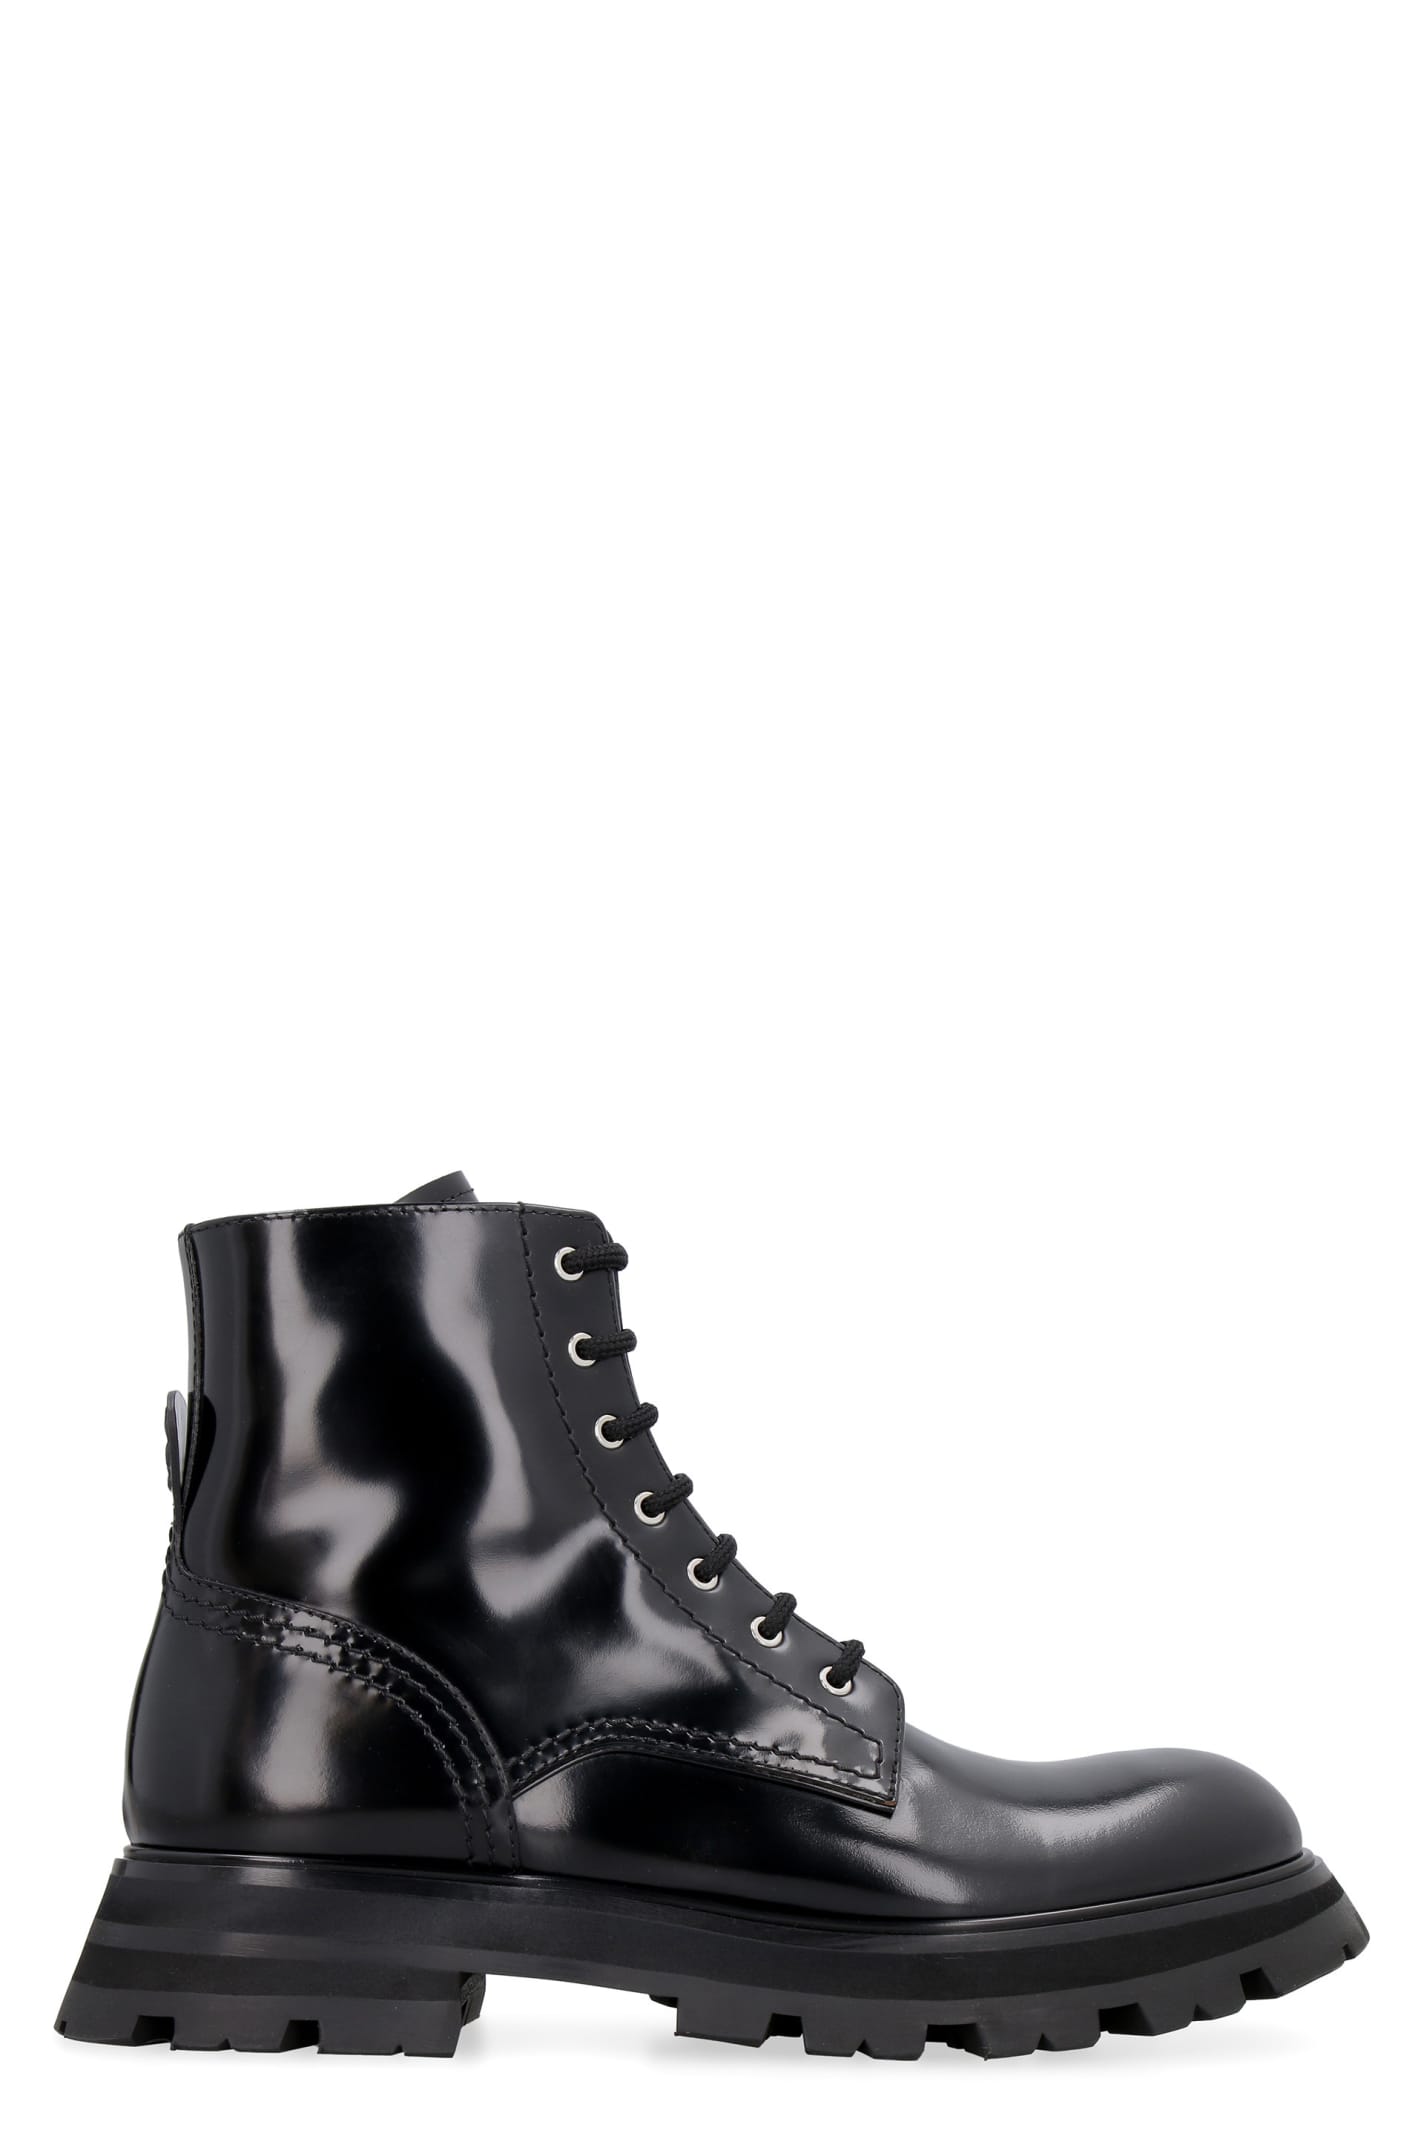 Buy Alexander McQueen Wander Leather Combat Boots online, shop Alexander McQueen shoes with free shipping